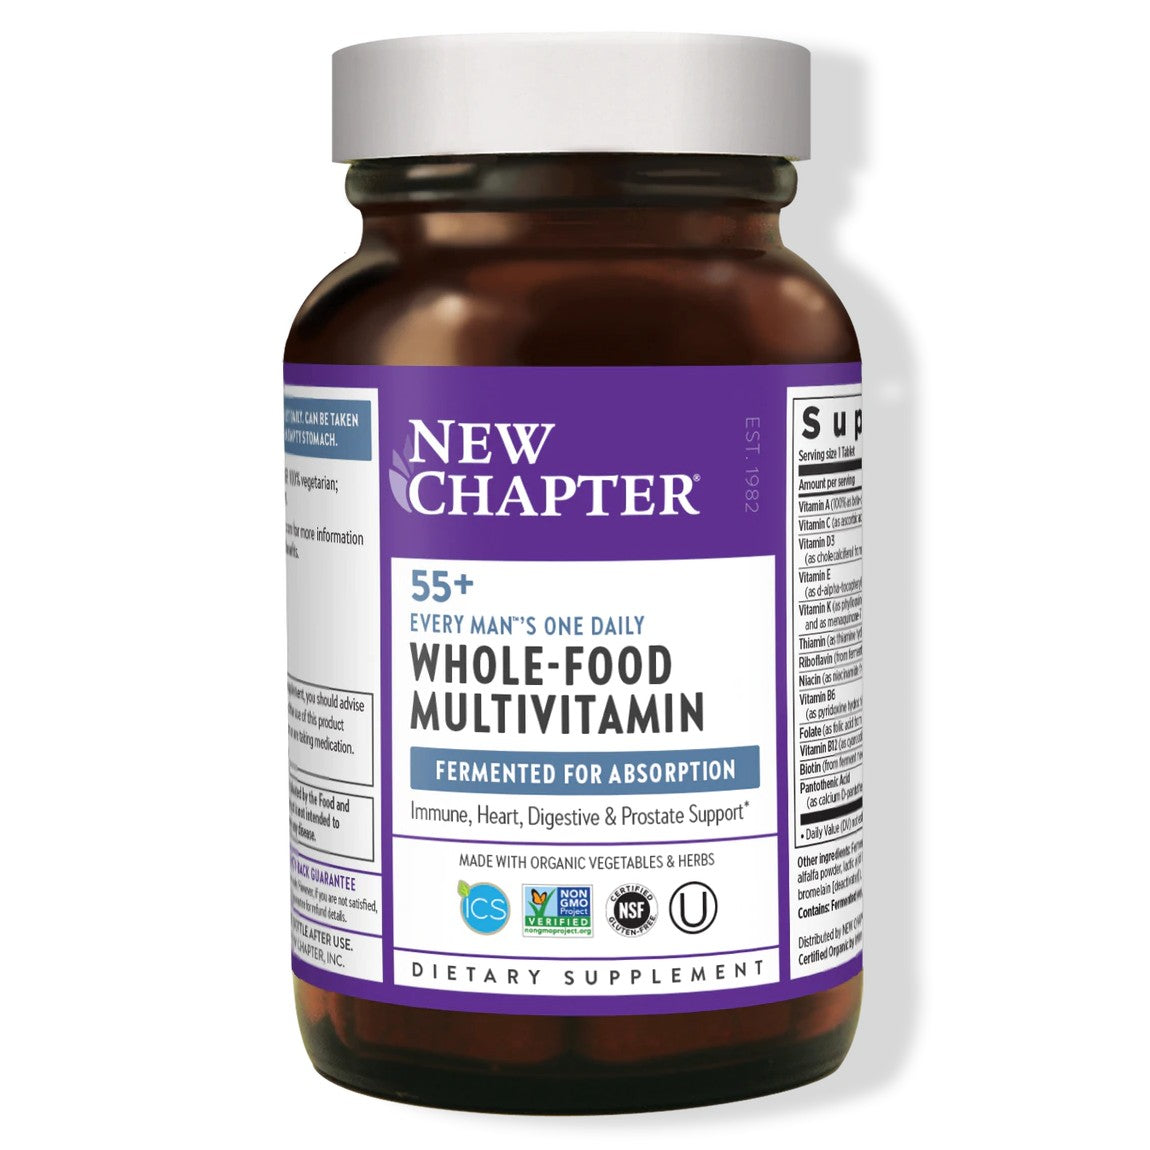 Every Man's One Daily 55+ Multivitamin - My Village Green